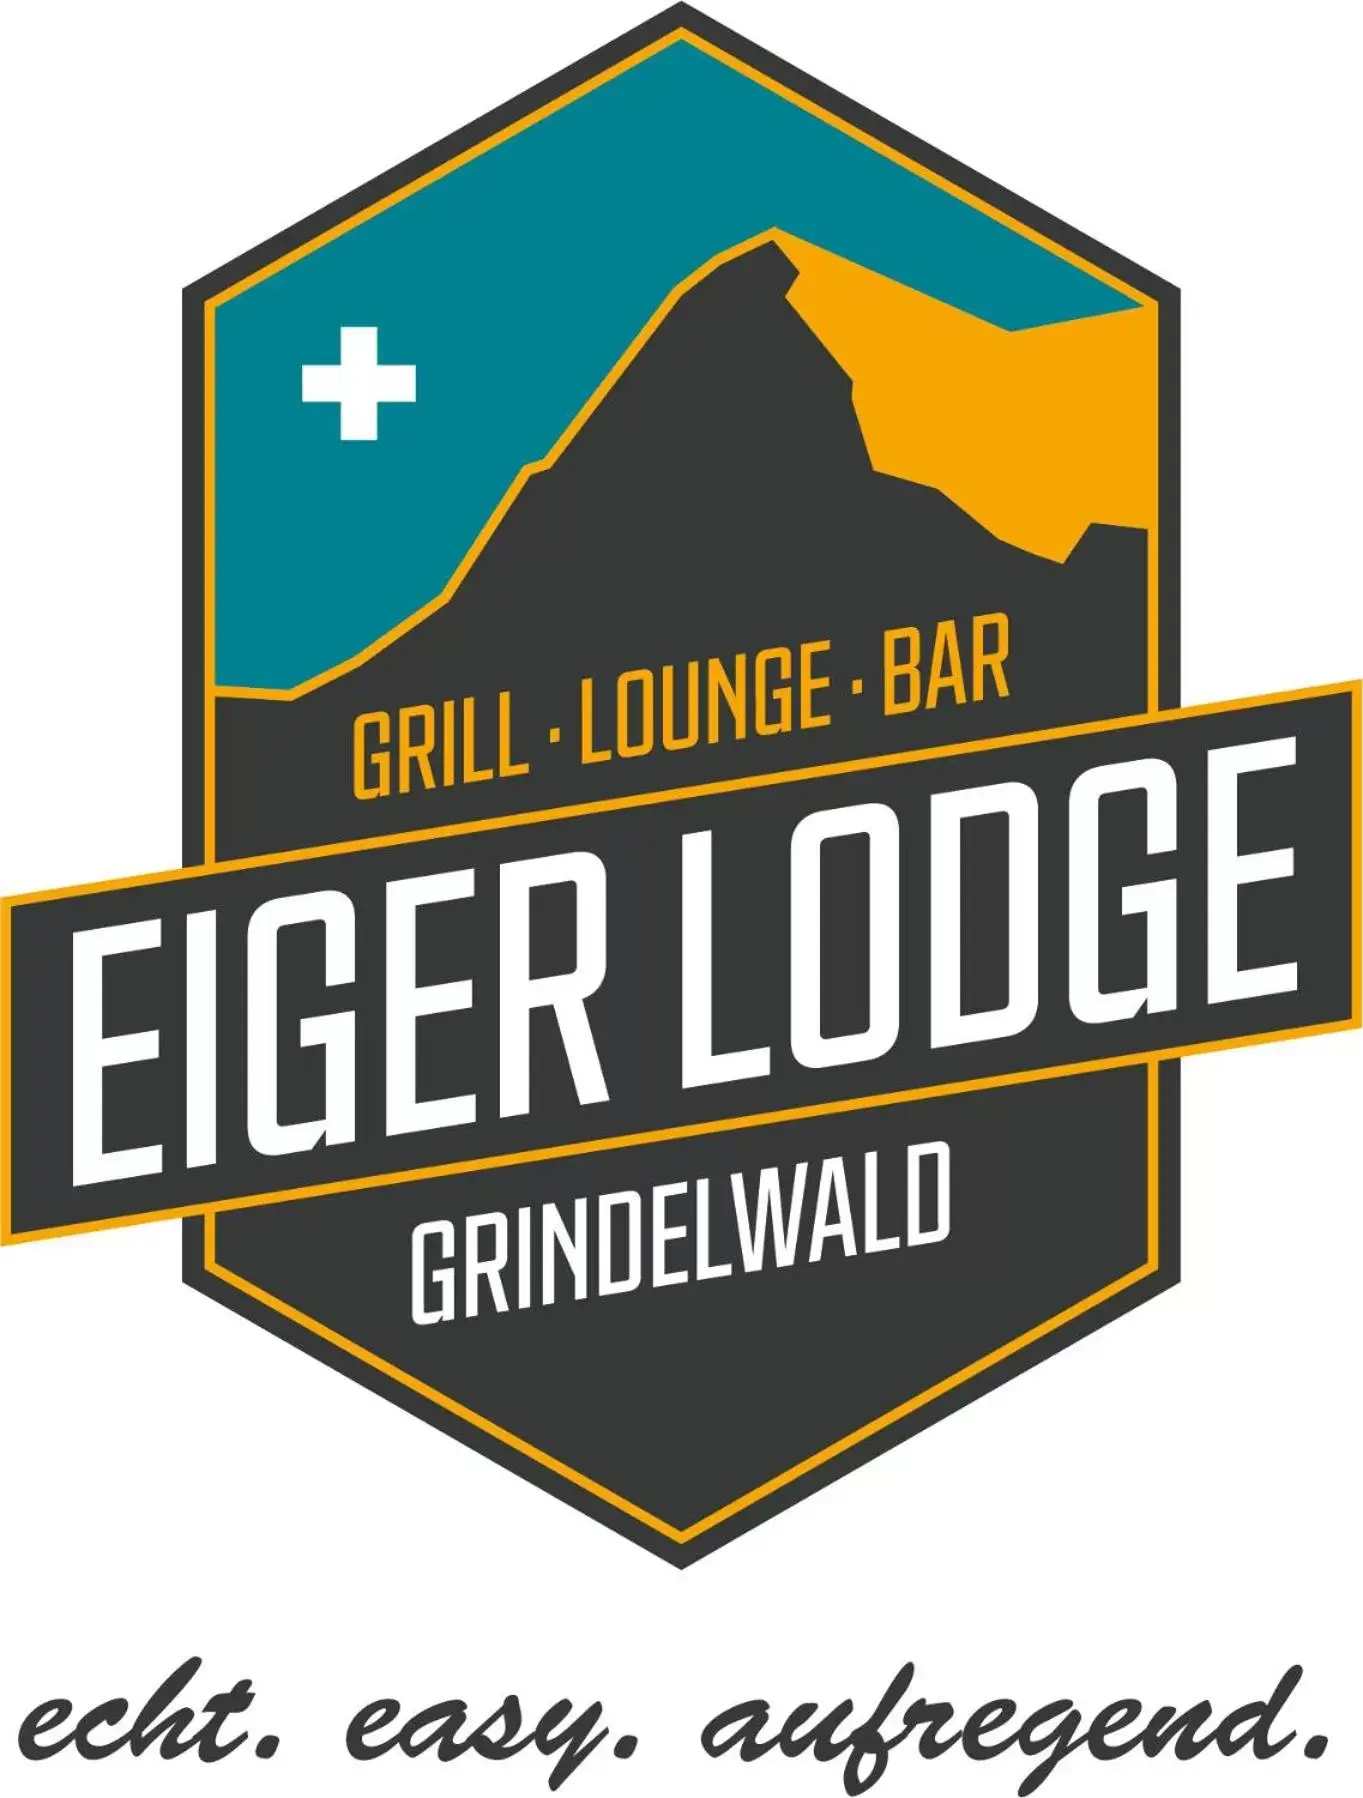 Property logo or sign in Eiger Lodge Chic